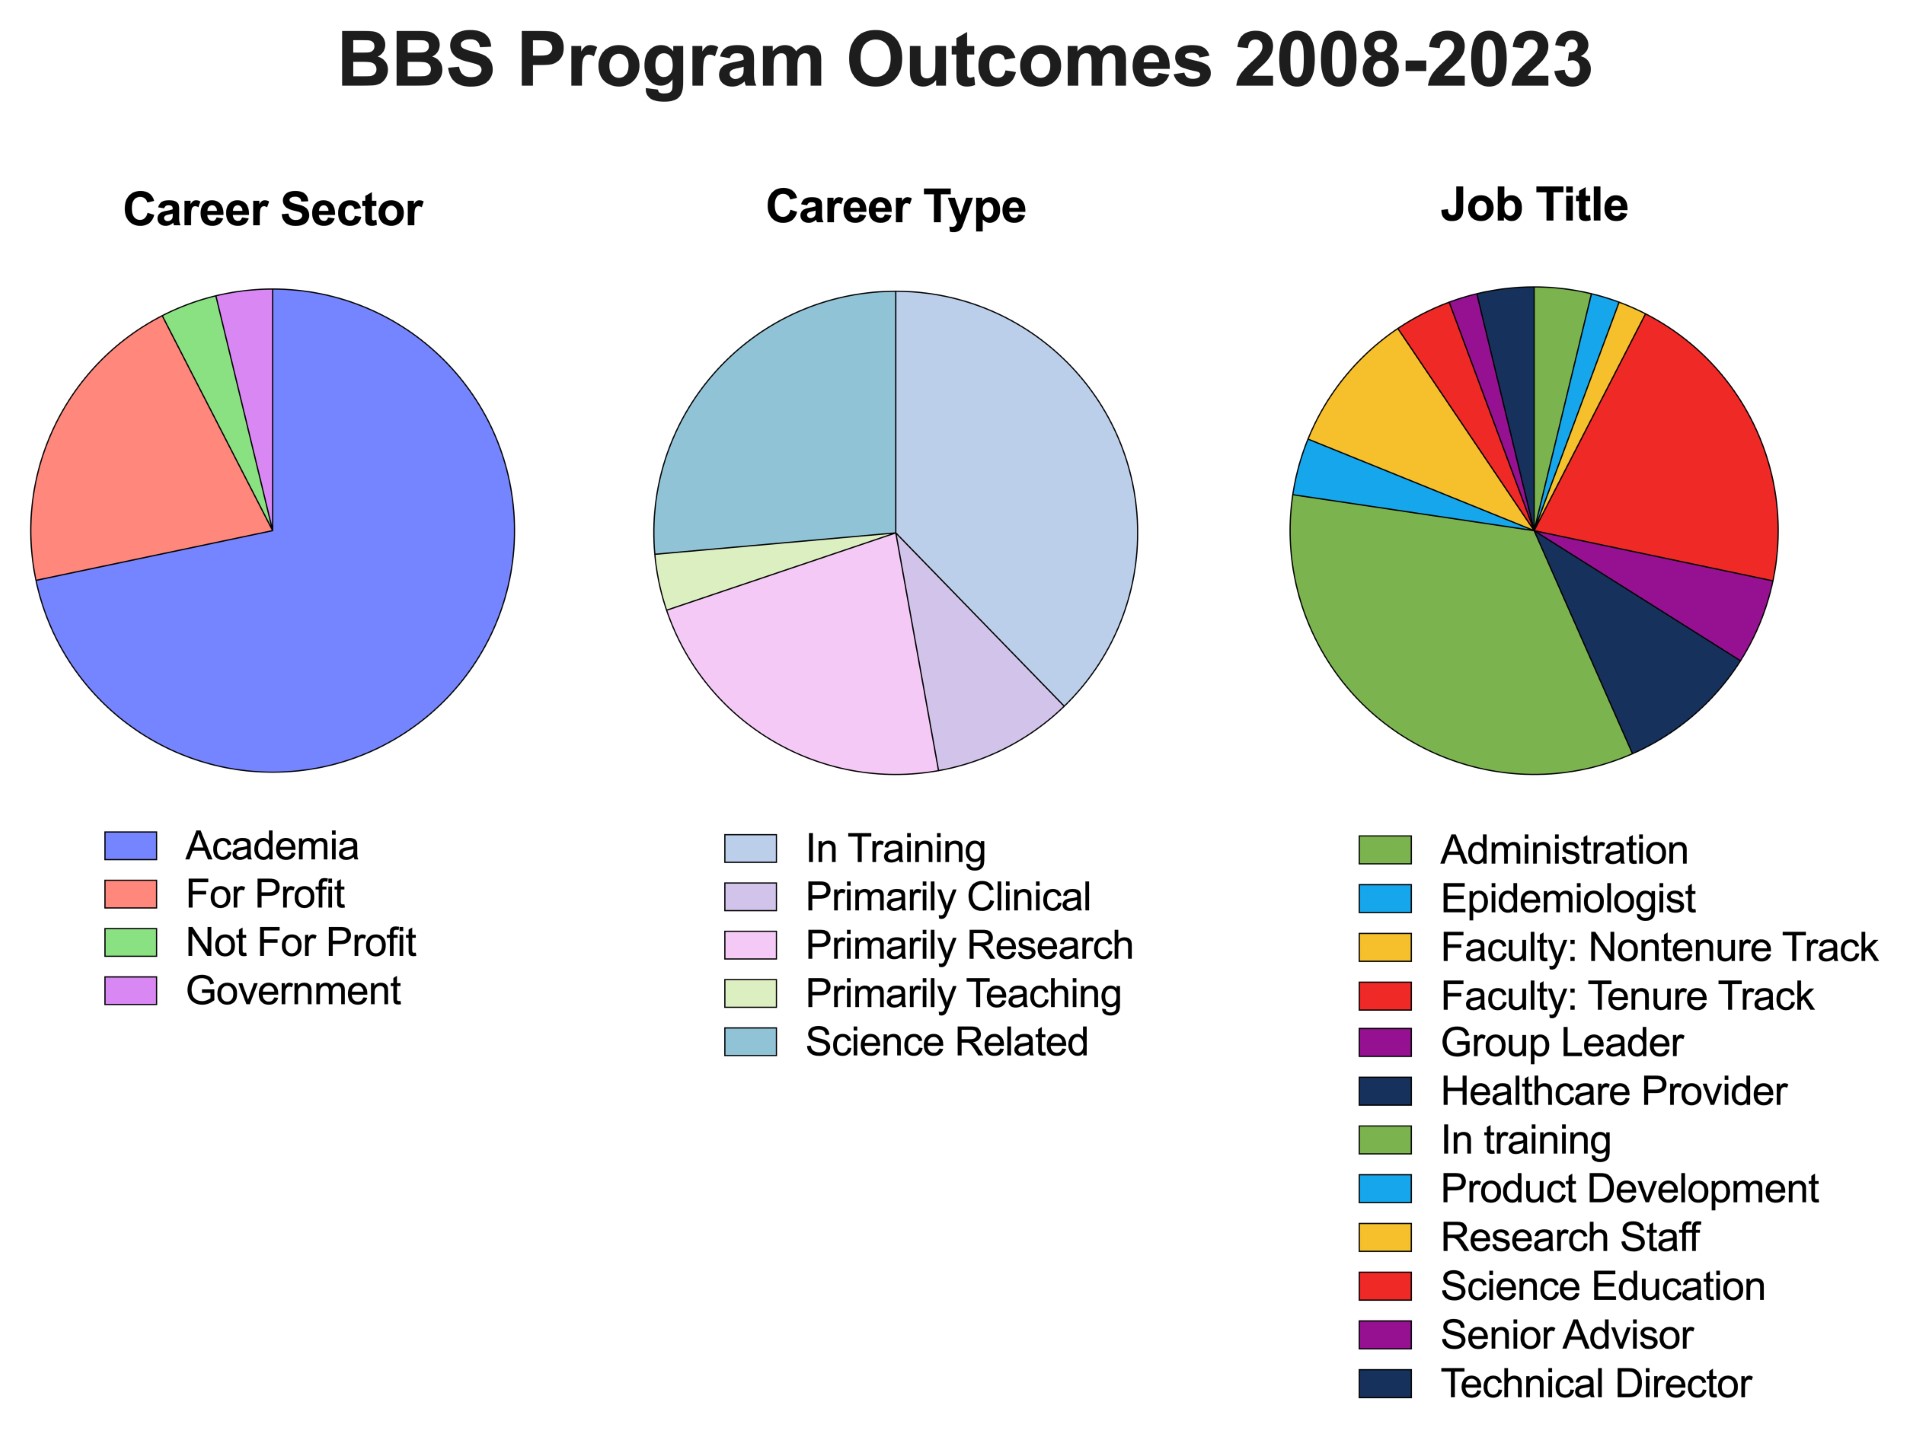 BBS Program Outcomes 2008-2023 - This image contains additional information about career sector outcomes, career type outcomes, and job titles